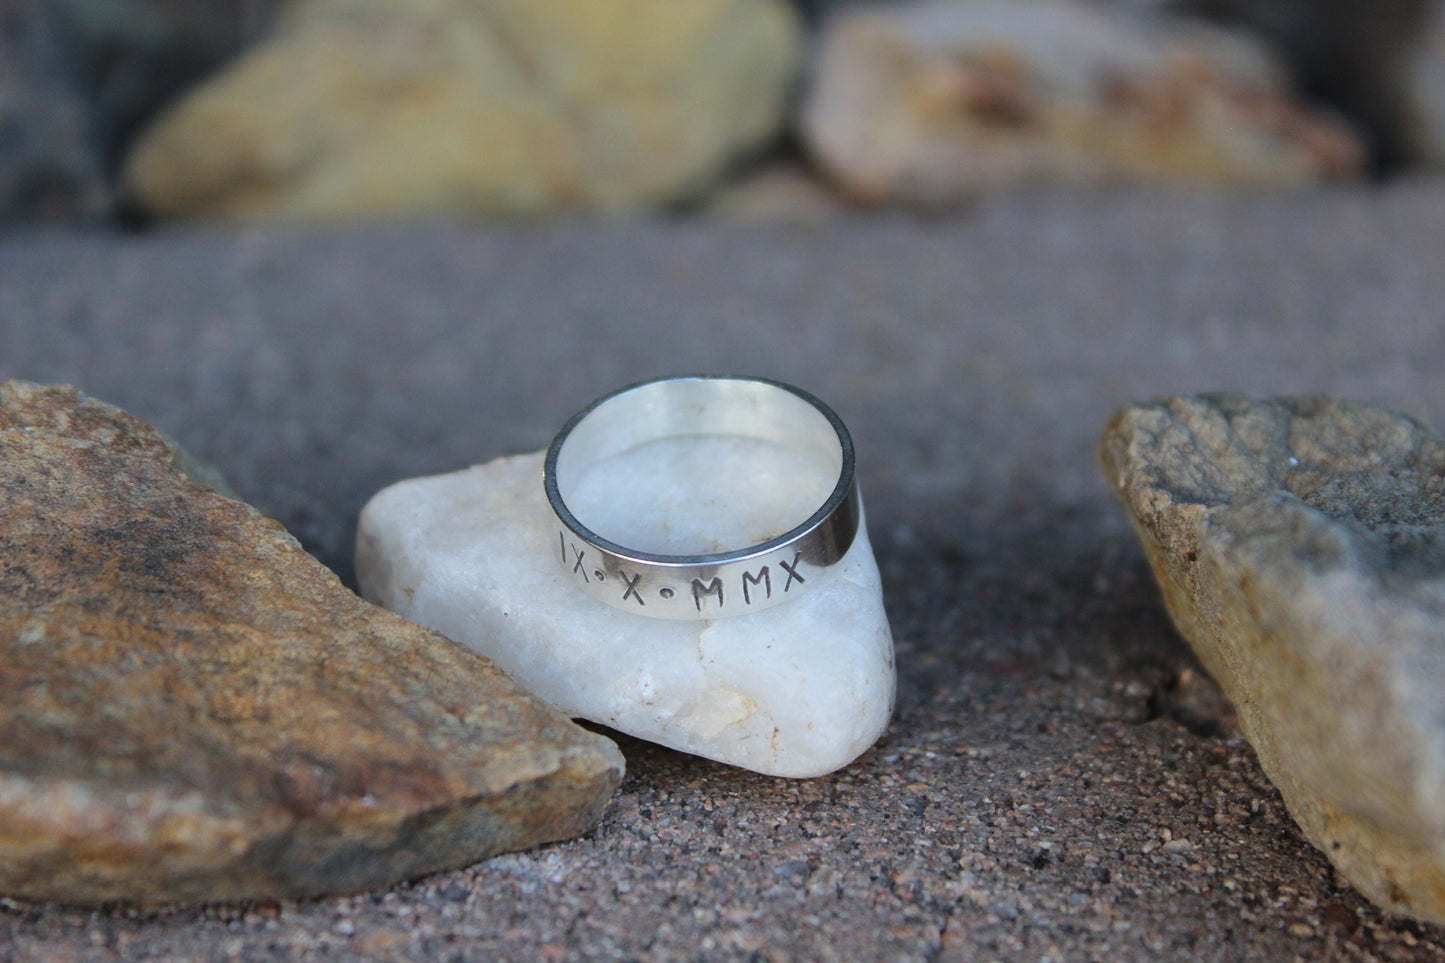 Men's Roman Numeral Date Ring in Sterling Silver